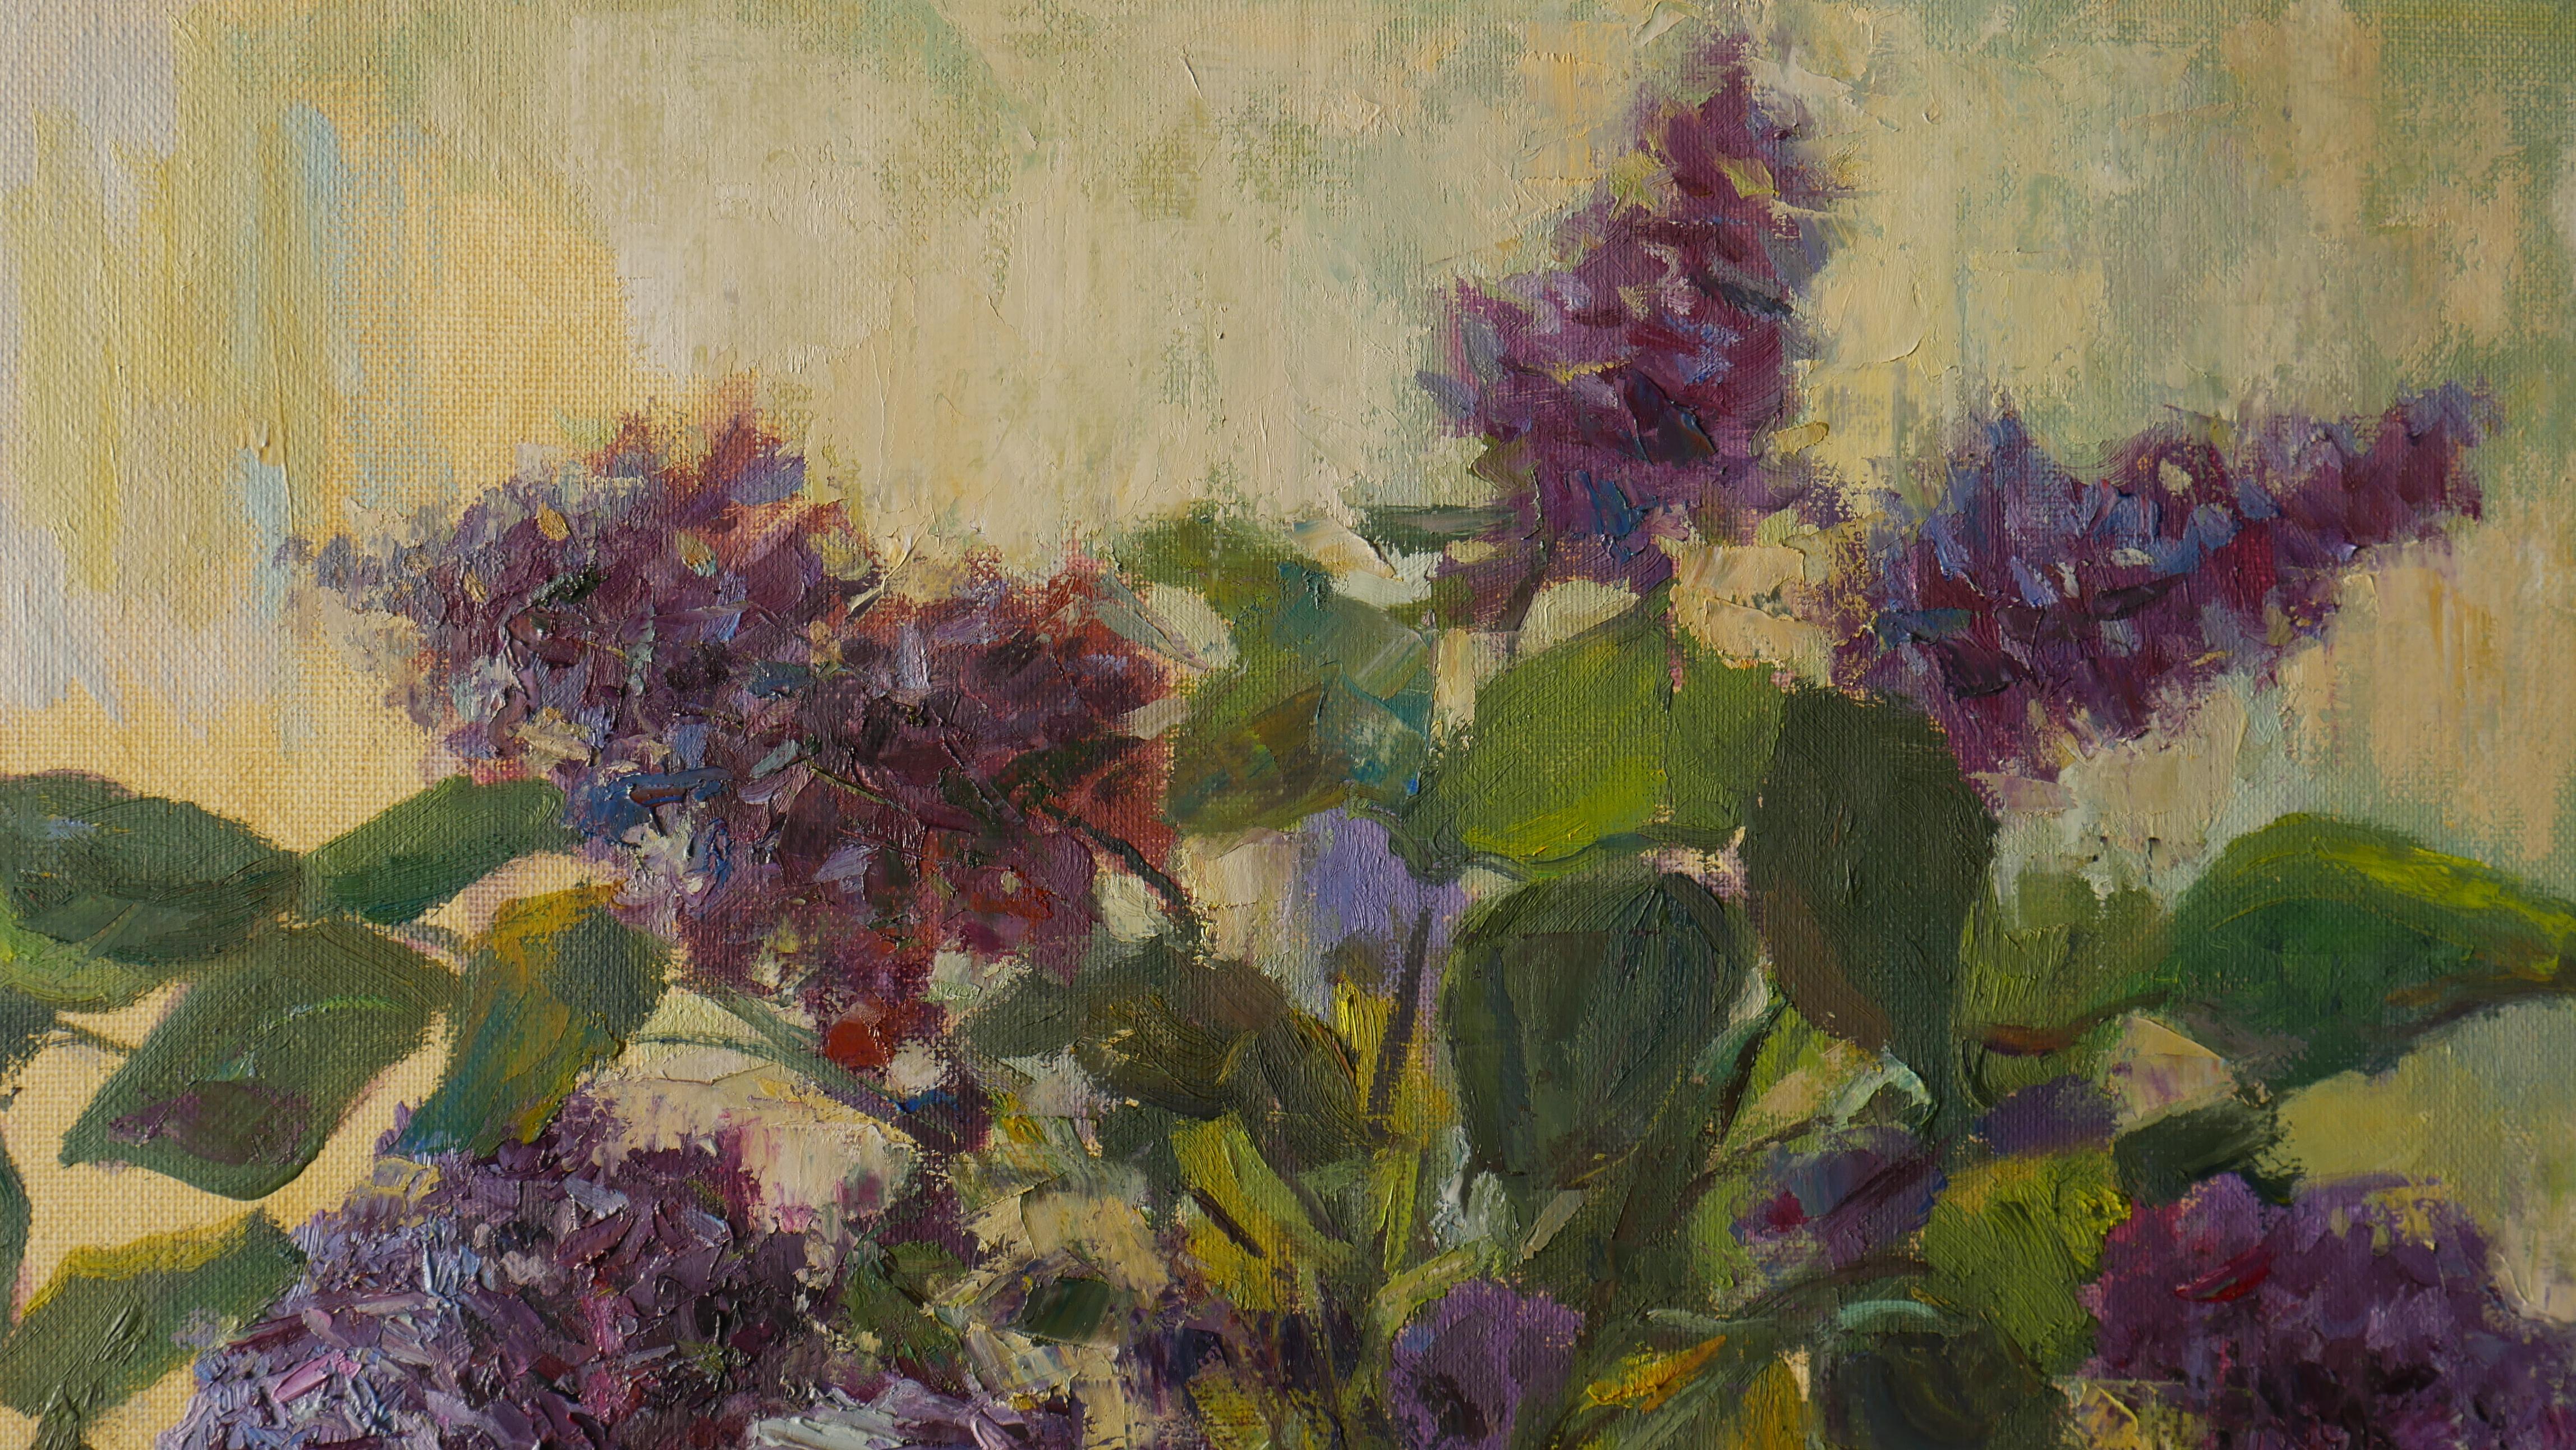 The Bouquet Of Lilacs Near the Light Window - floral still life, oil painting For Sale 2